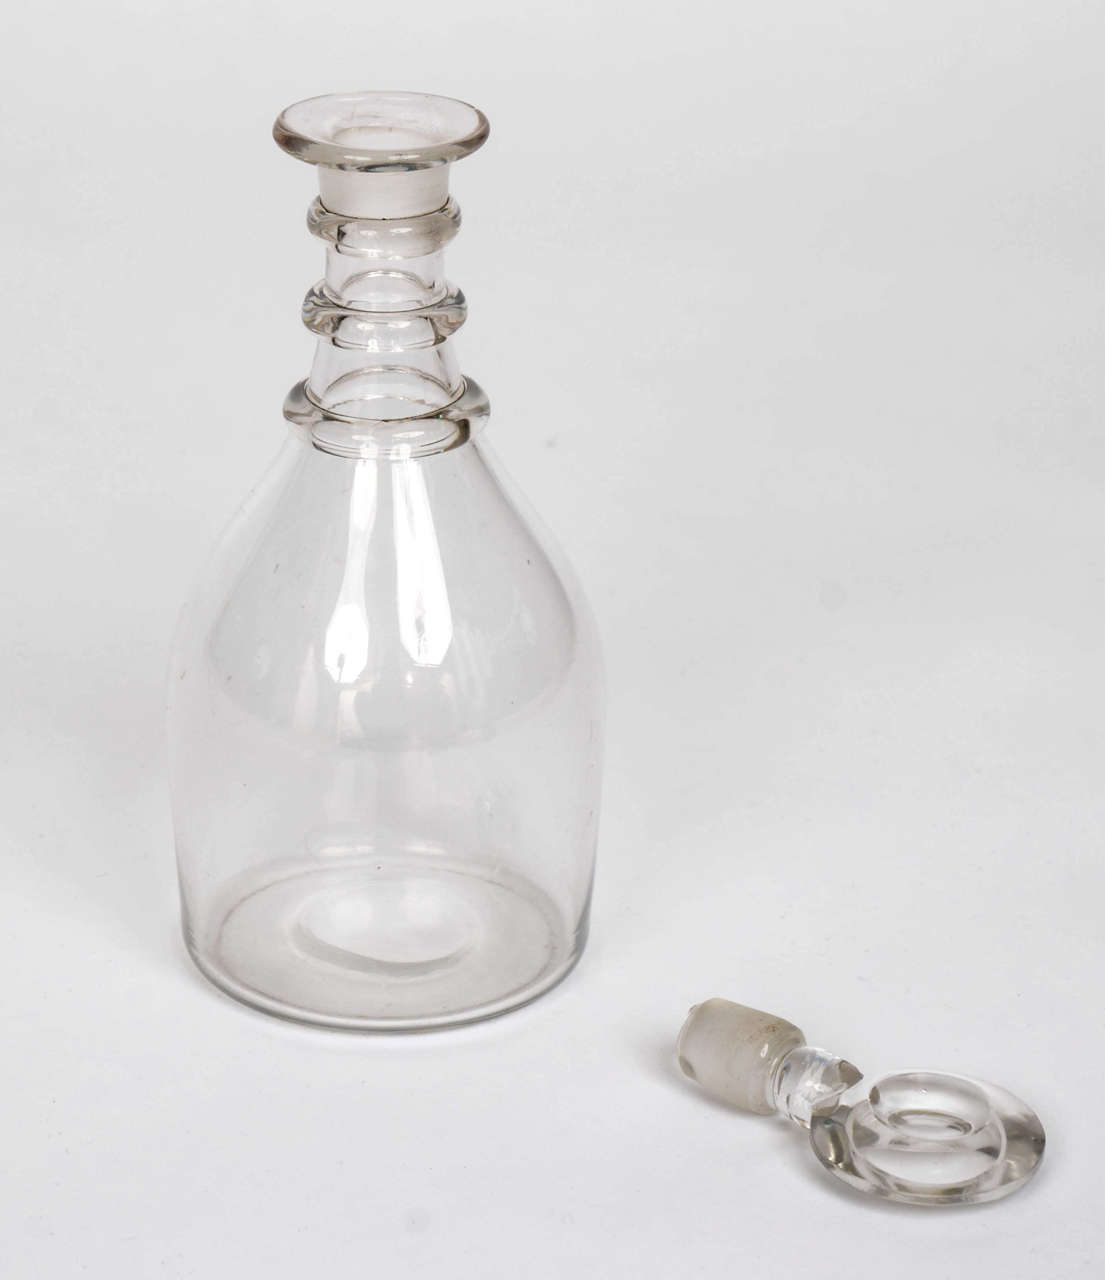 British 18th Century, GLASS DECANTER, 3 Neck Rings, English, hand blown crystal